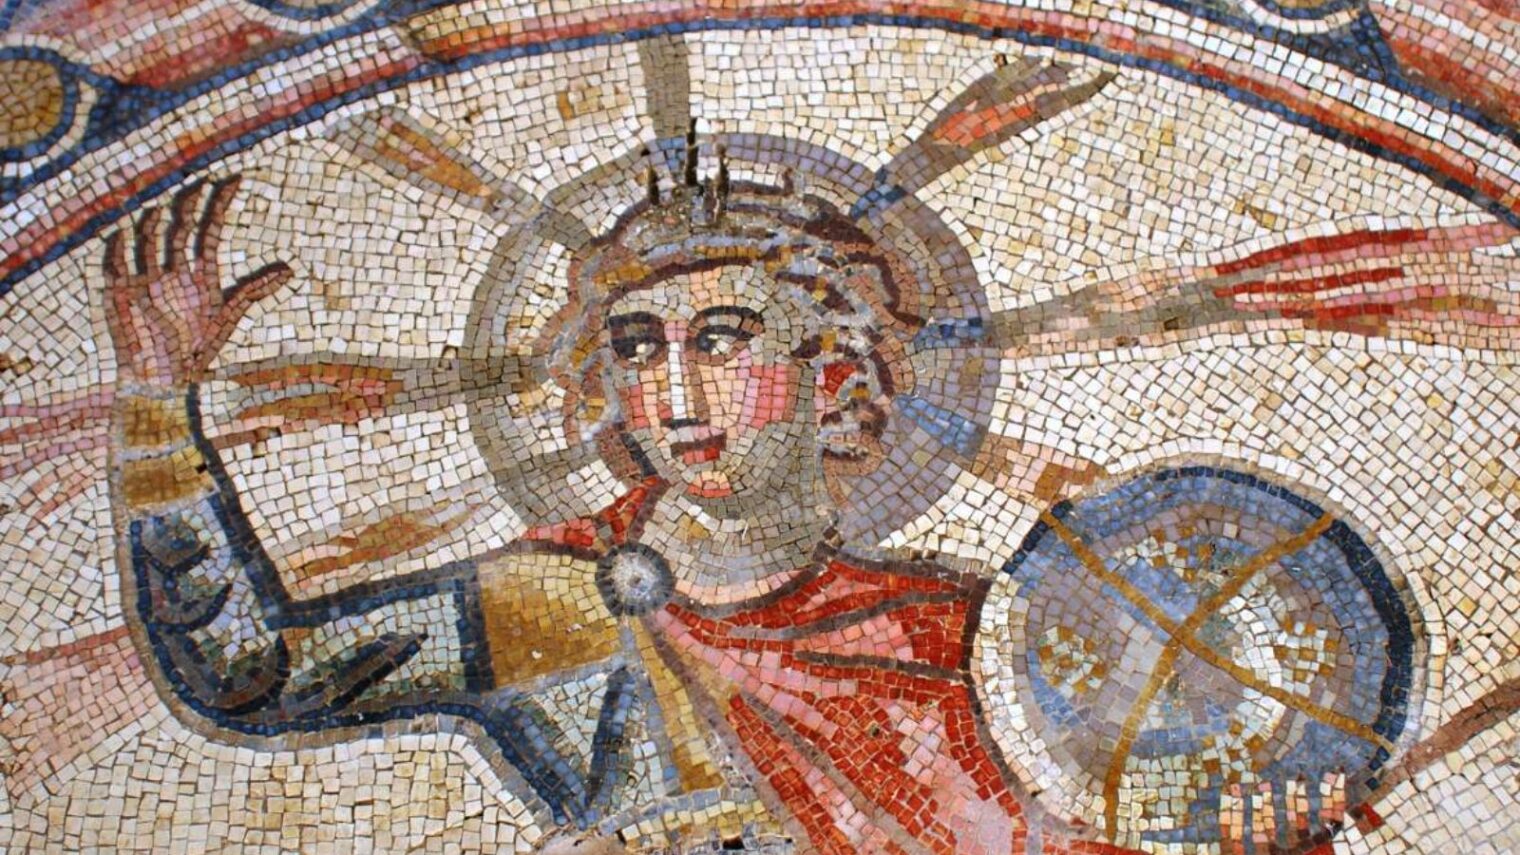 The fourth century mosaic at Severus Synagogue in Hamat Tiberias in northern Israel has three panels – one with Greek inscriptions of its donors’ names; another with a zodiac starring Greek sun god Helios dressed as a haloed emperor surrounded by the star signs and four women symbolizing the seasons; and another showing a tabernacle and other Jewish symbols. Photo by Reuven Riven